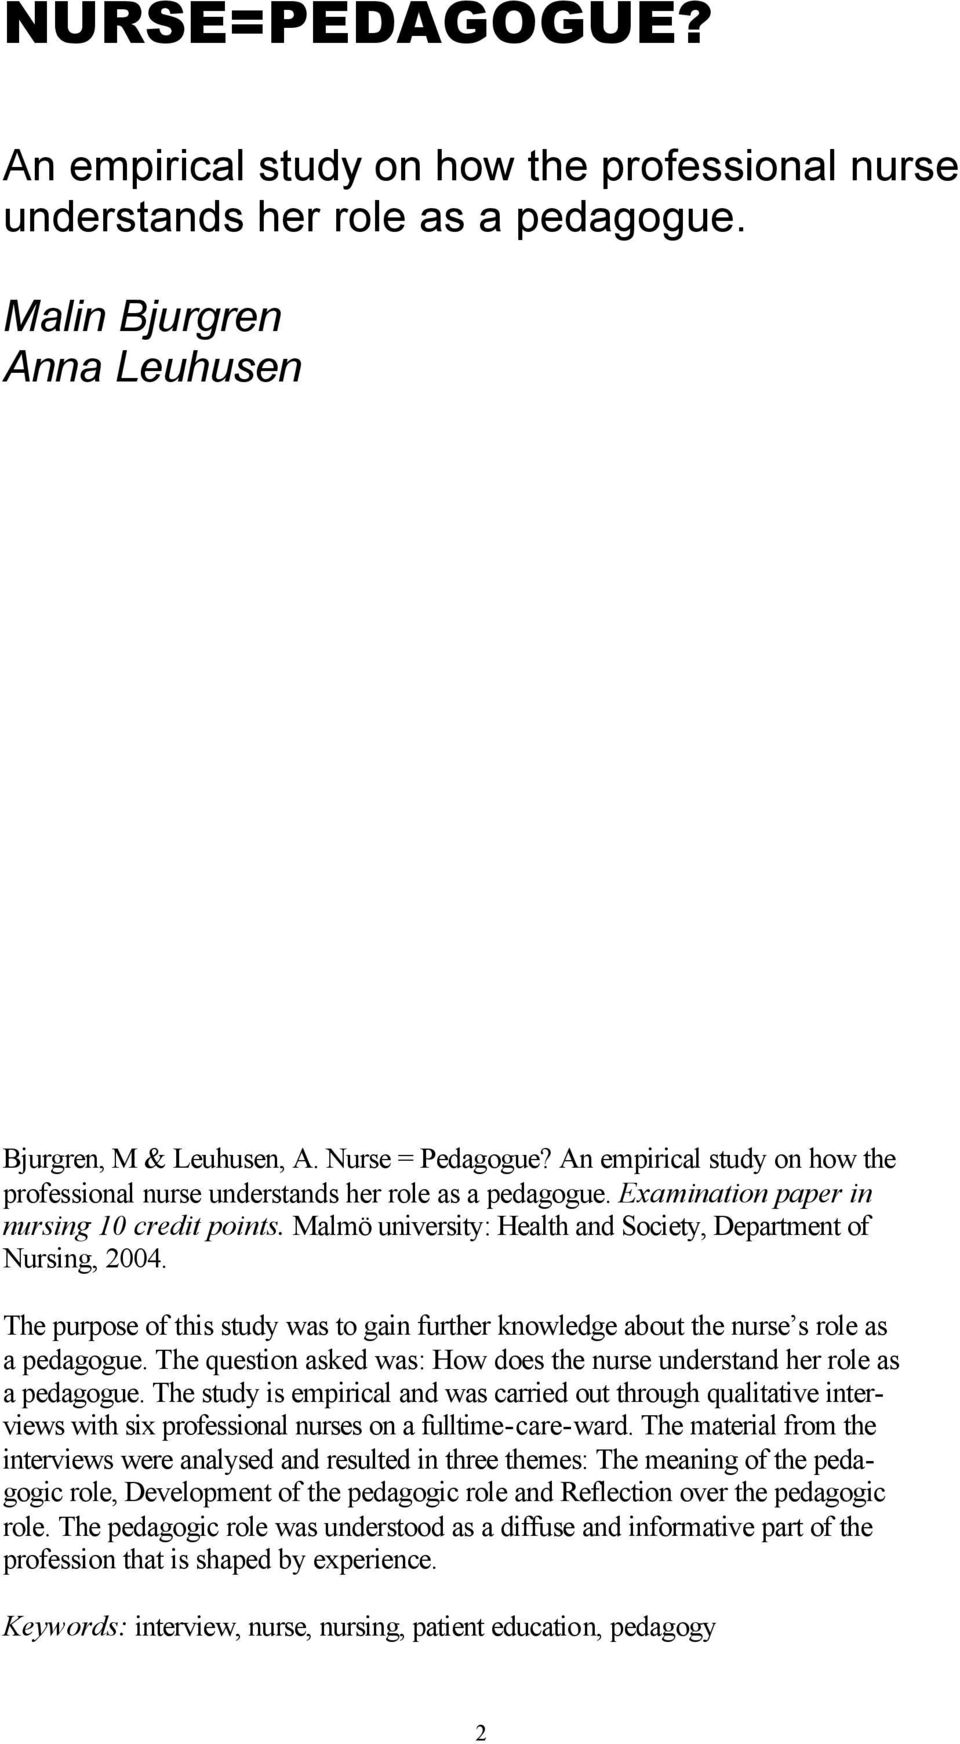 The purpose of this study was to gain further knowledge about the nurse s role as a pedagogue. The question asked was: How does the nurse understand her role as a pedagogue.